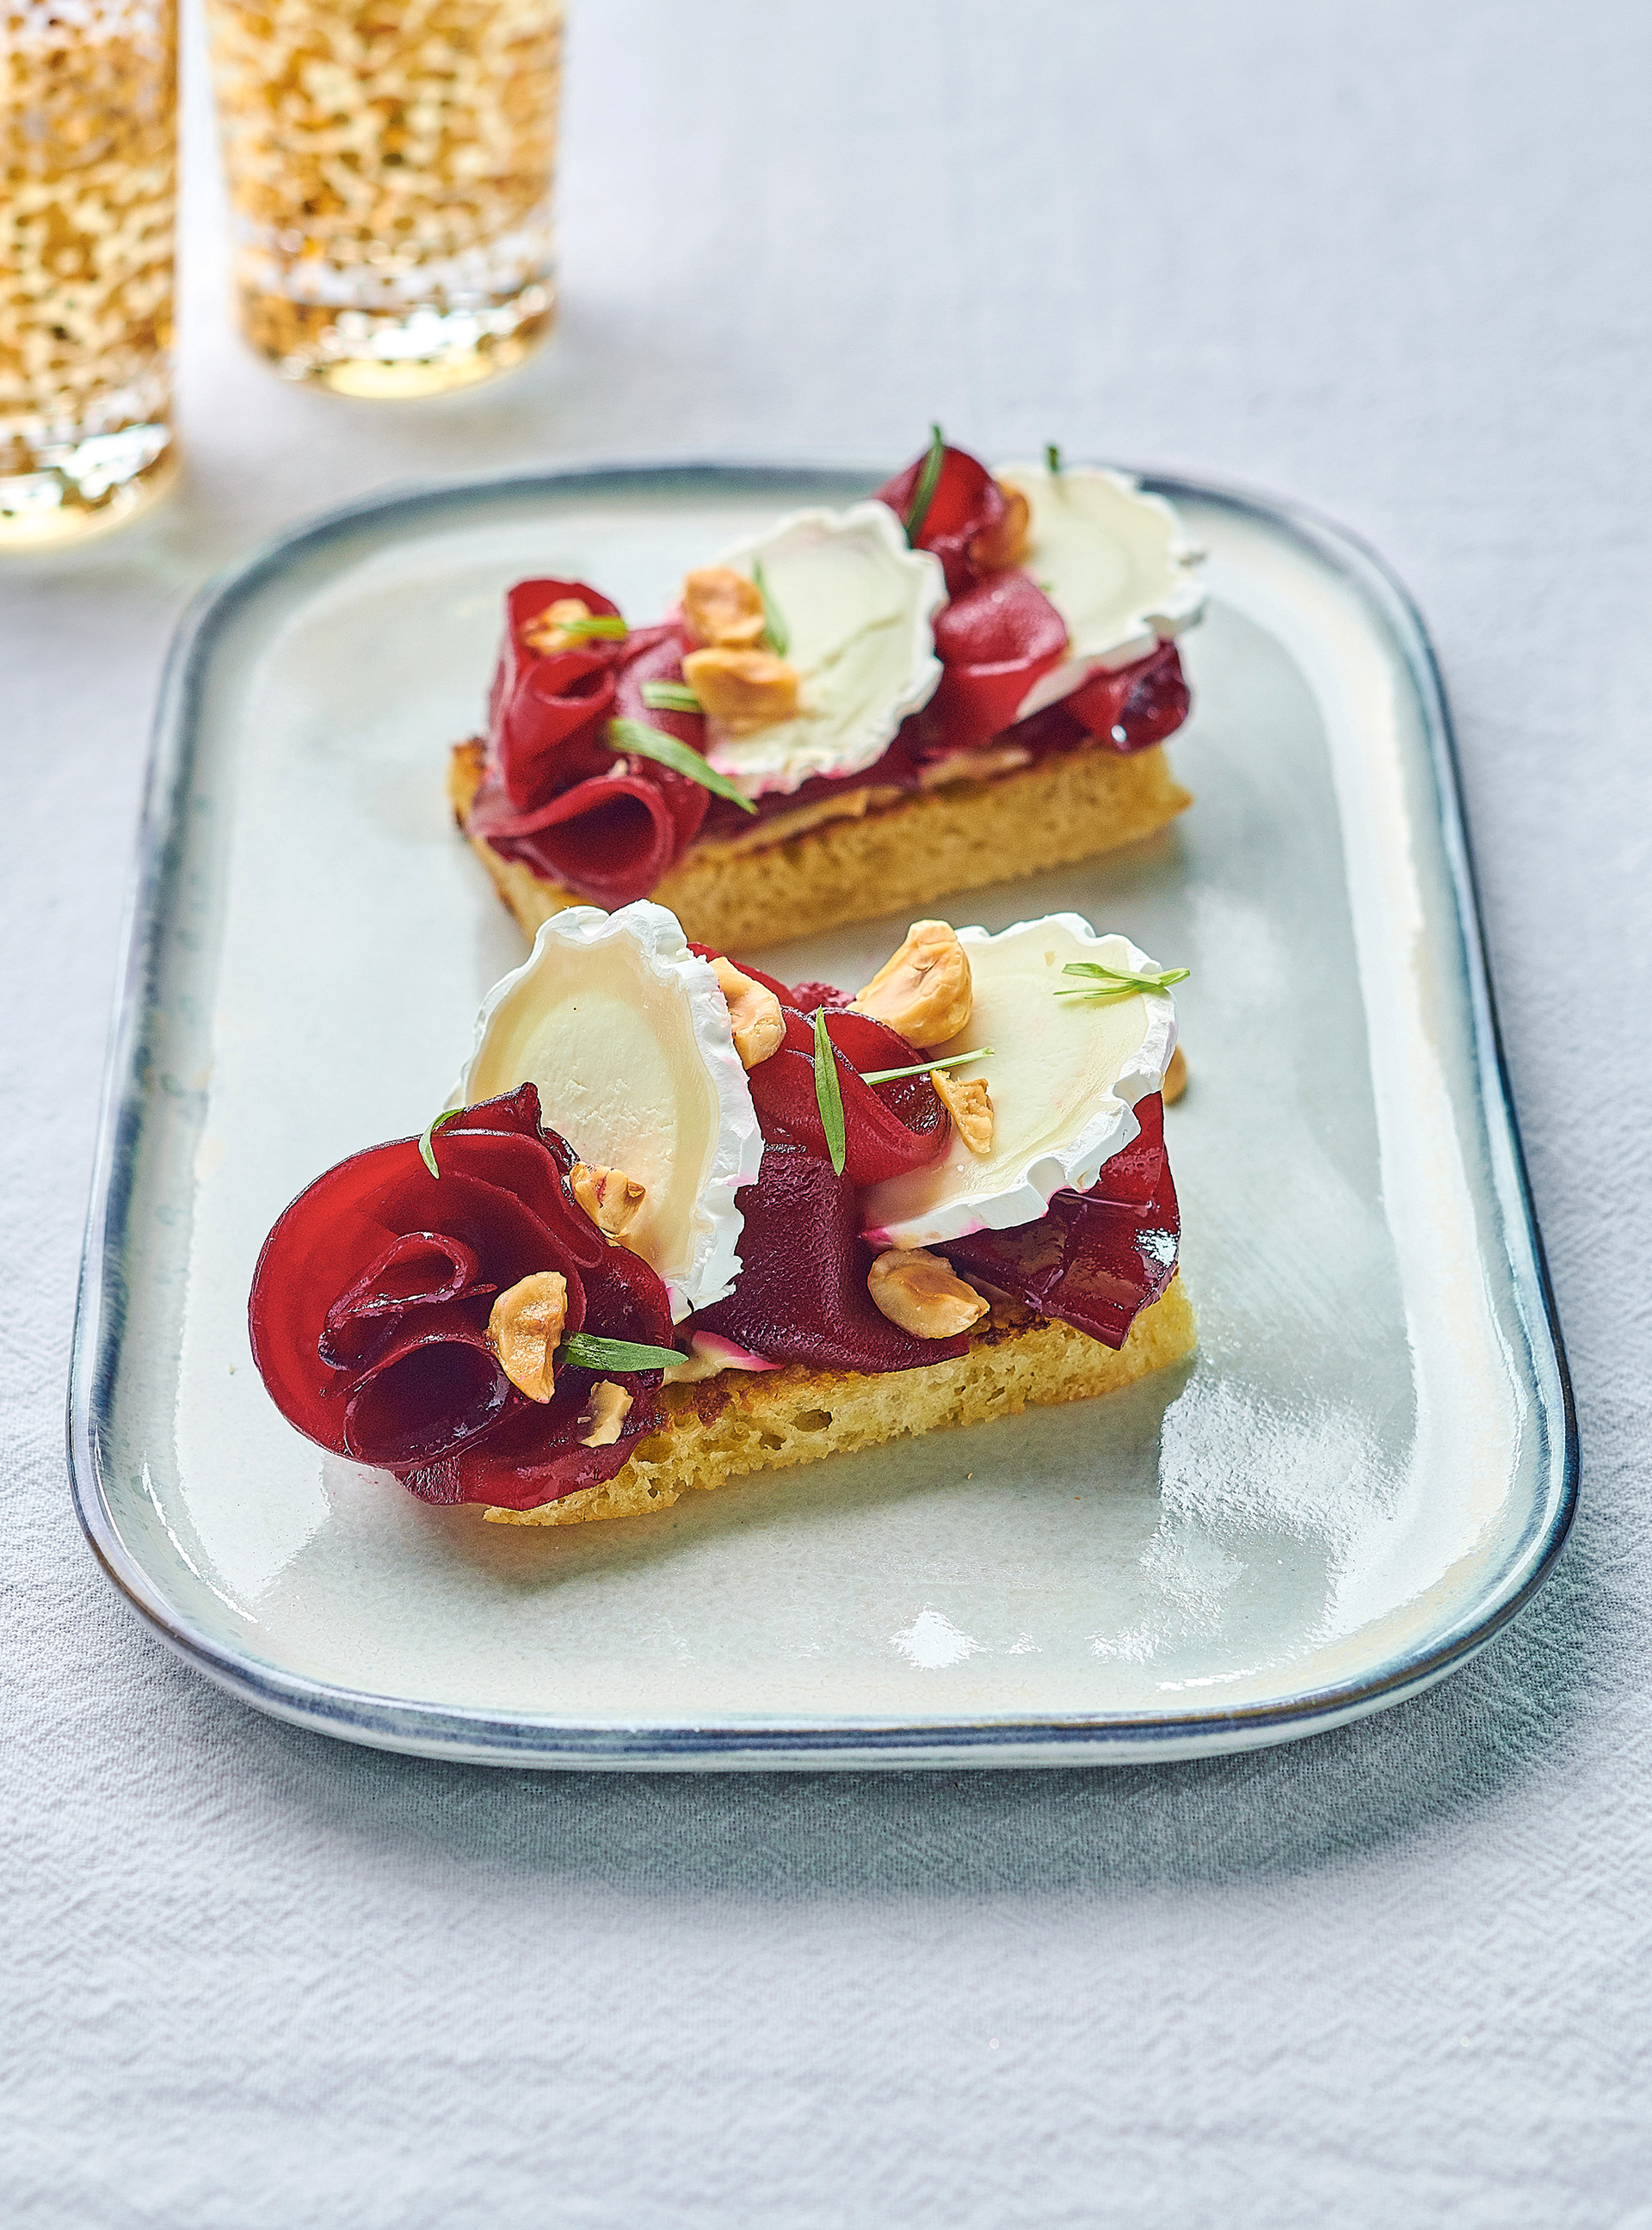 Goat Cheese and Beet Flowers on Brioche